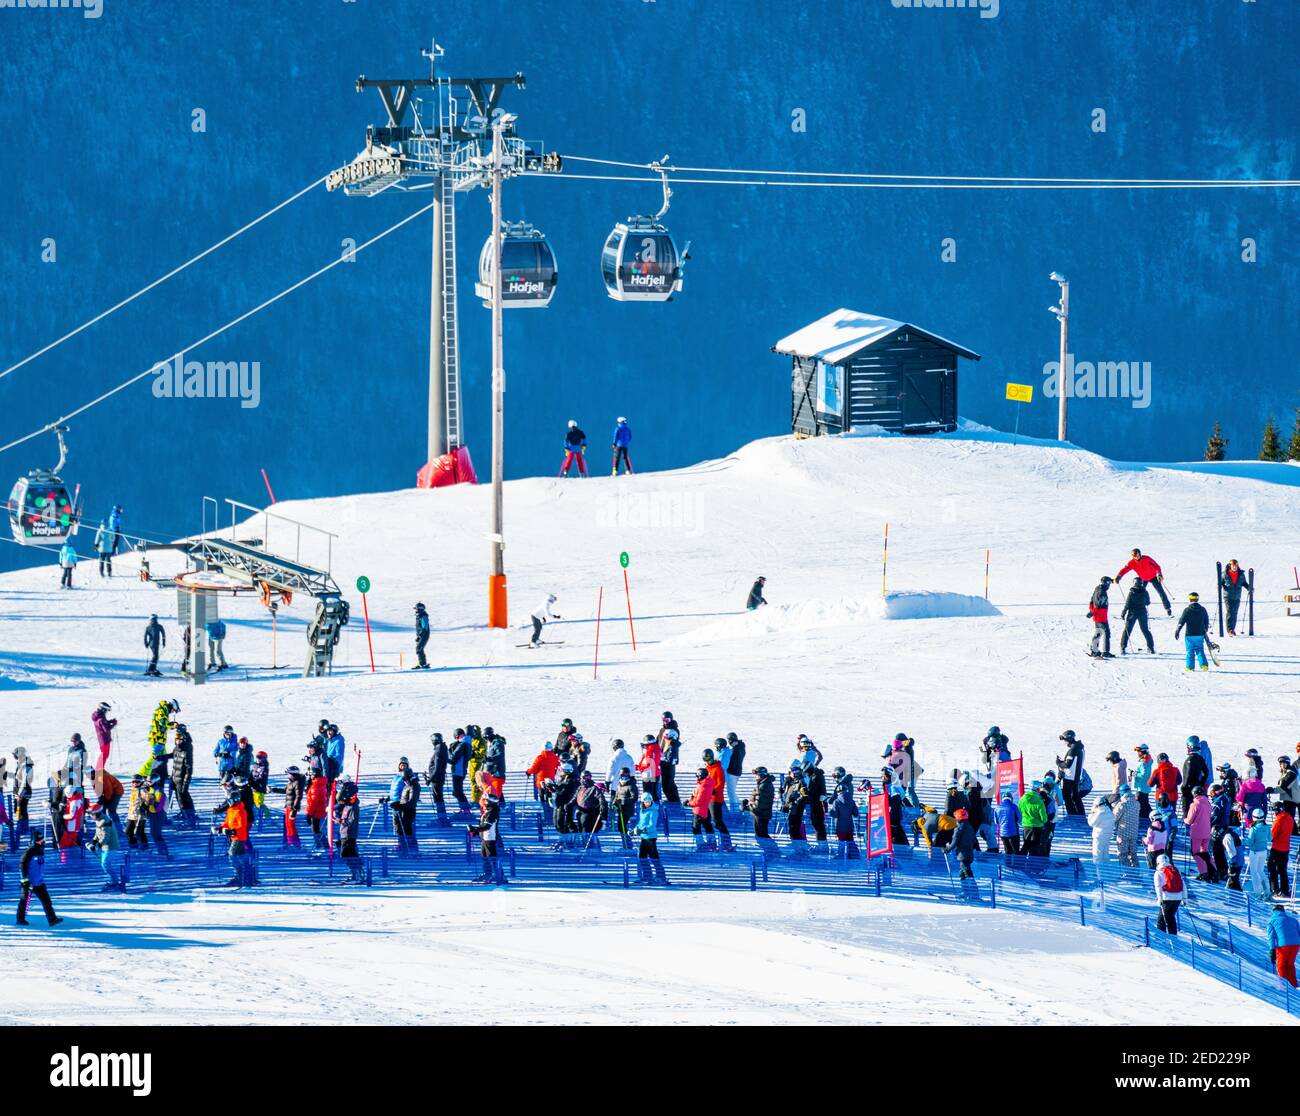 Crowds of people waiting in line by the chair lift at Hafjell alpine ski resort. Stock Photo